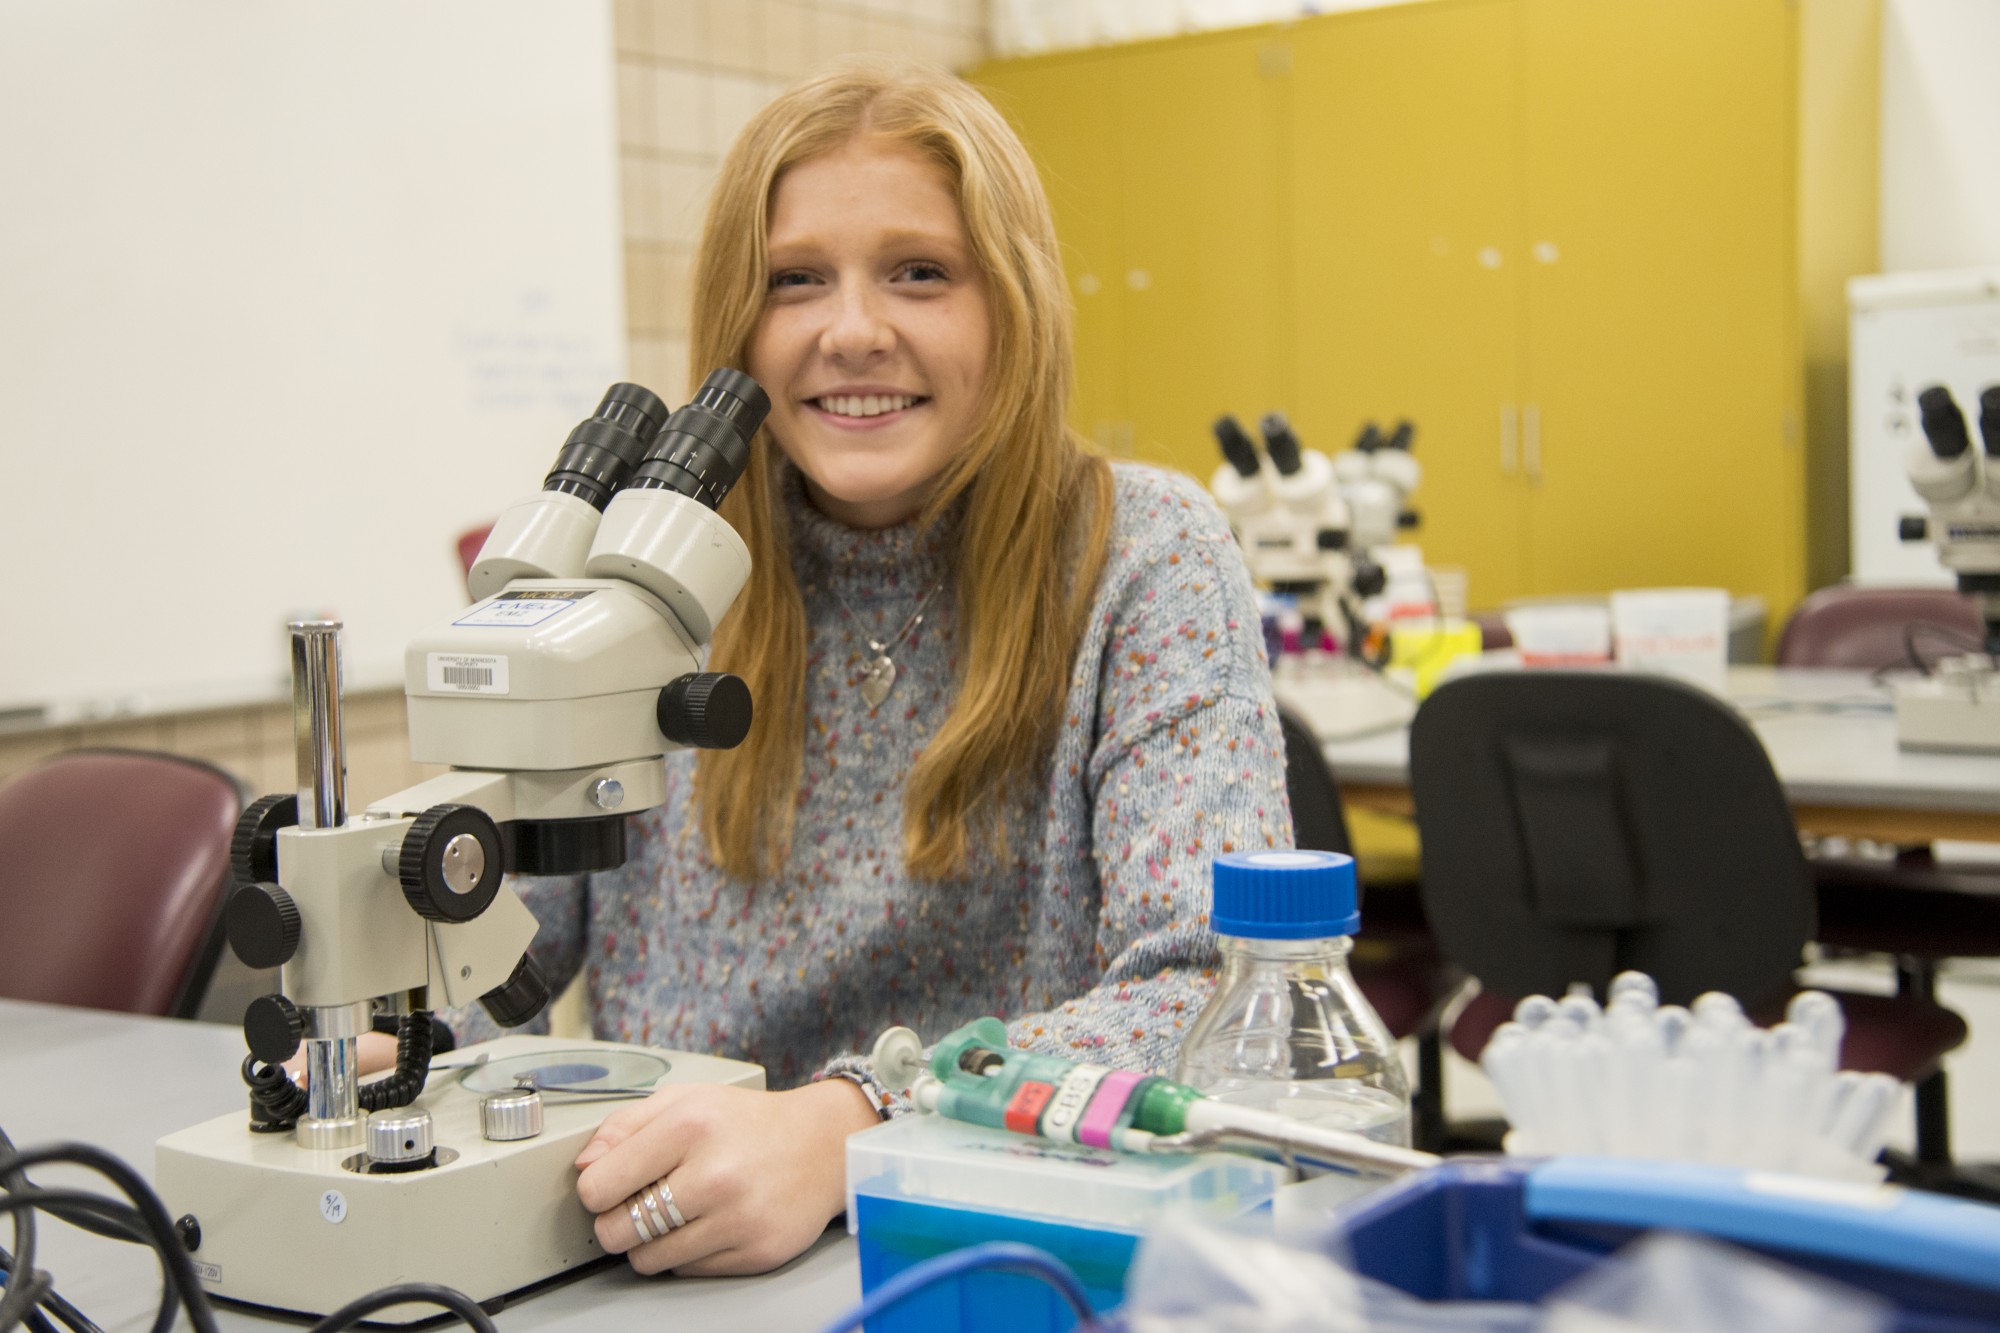 Student Researcher Paiton Schwab, who conducts brain research with Ted Hinchcliffe, poses for a portrait in the Molecular and Cellular Biology building on Friday, Feb. 28.